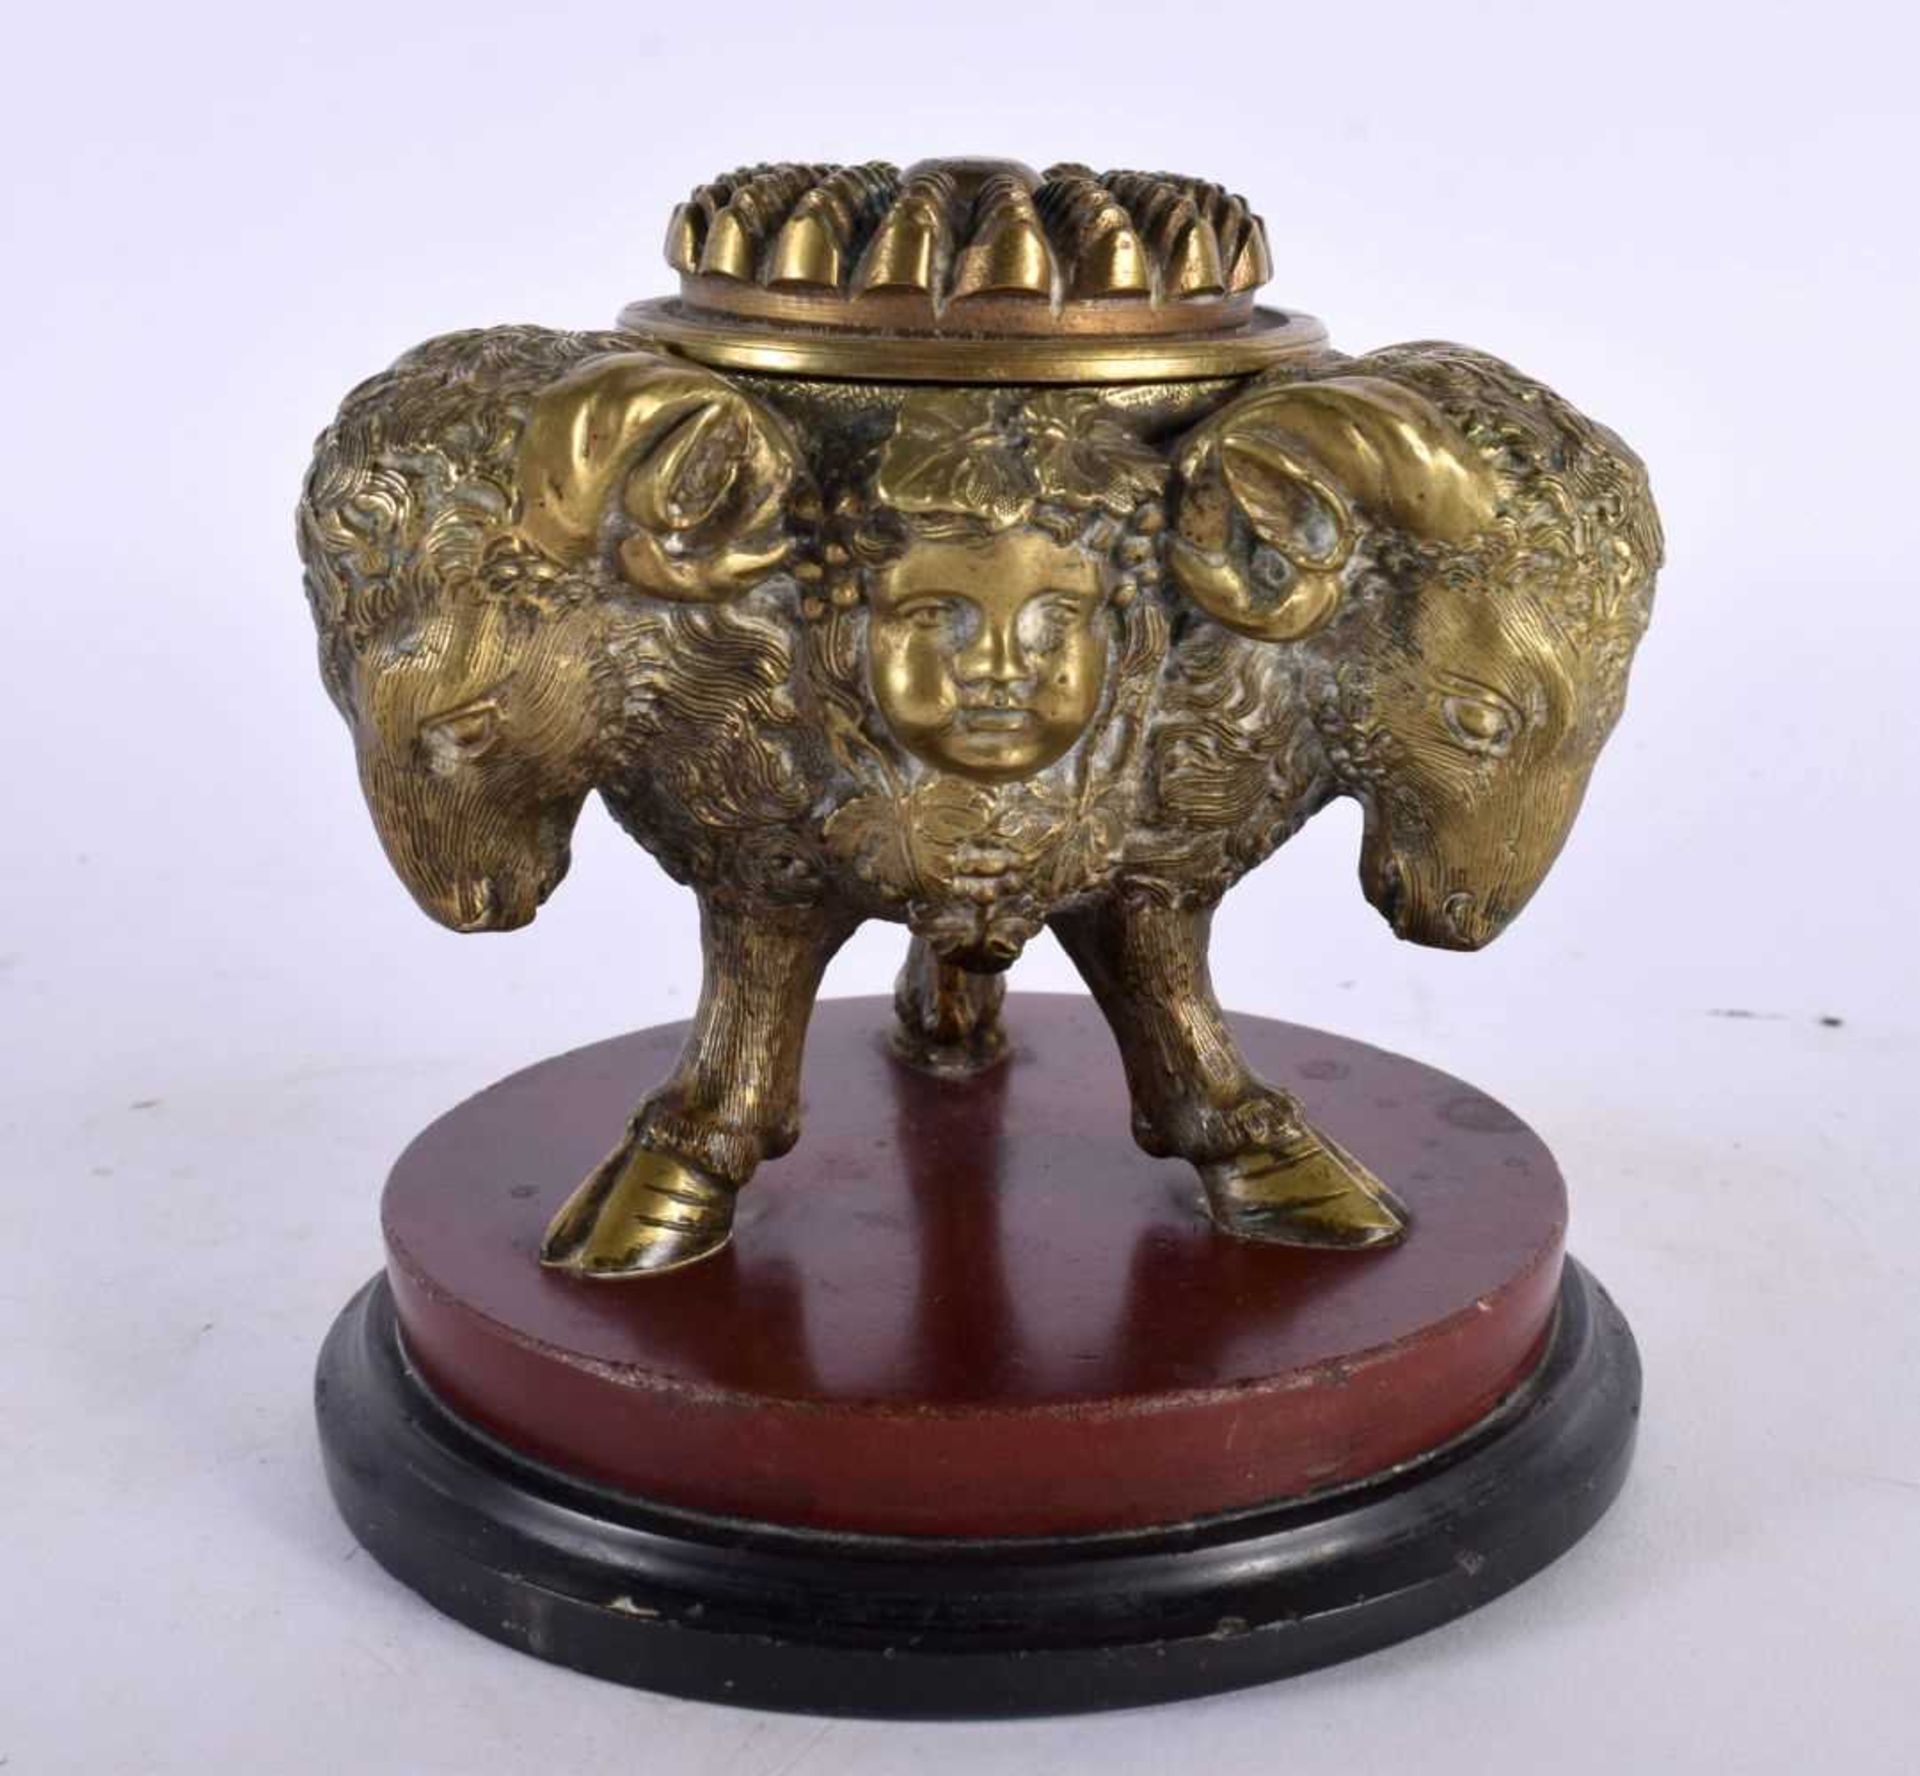 A FINE 19TH CENTURY EUROPEAN GRAND TOUR BRONZE INKWELL AND COVER upon a red marble base, formed with